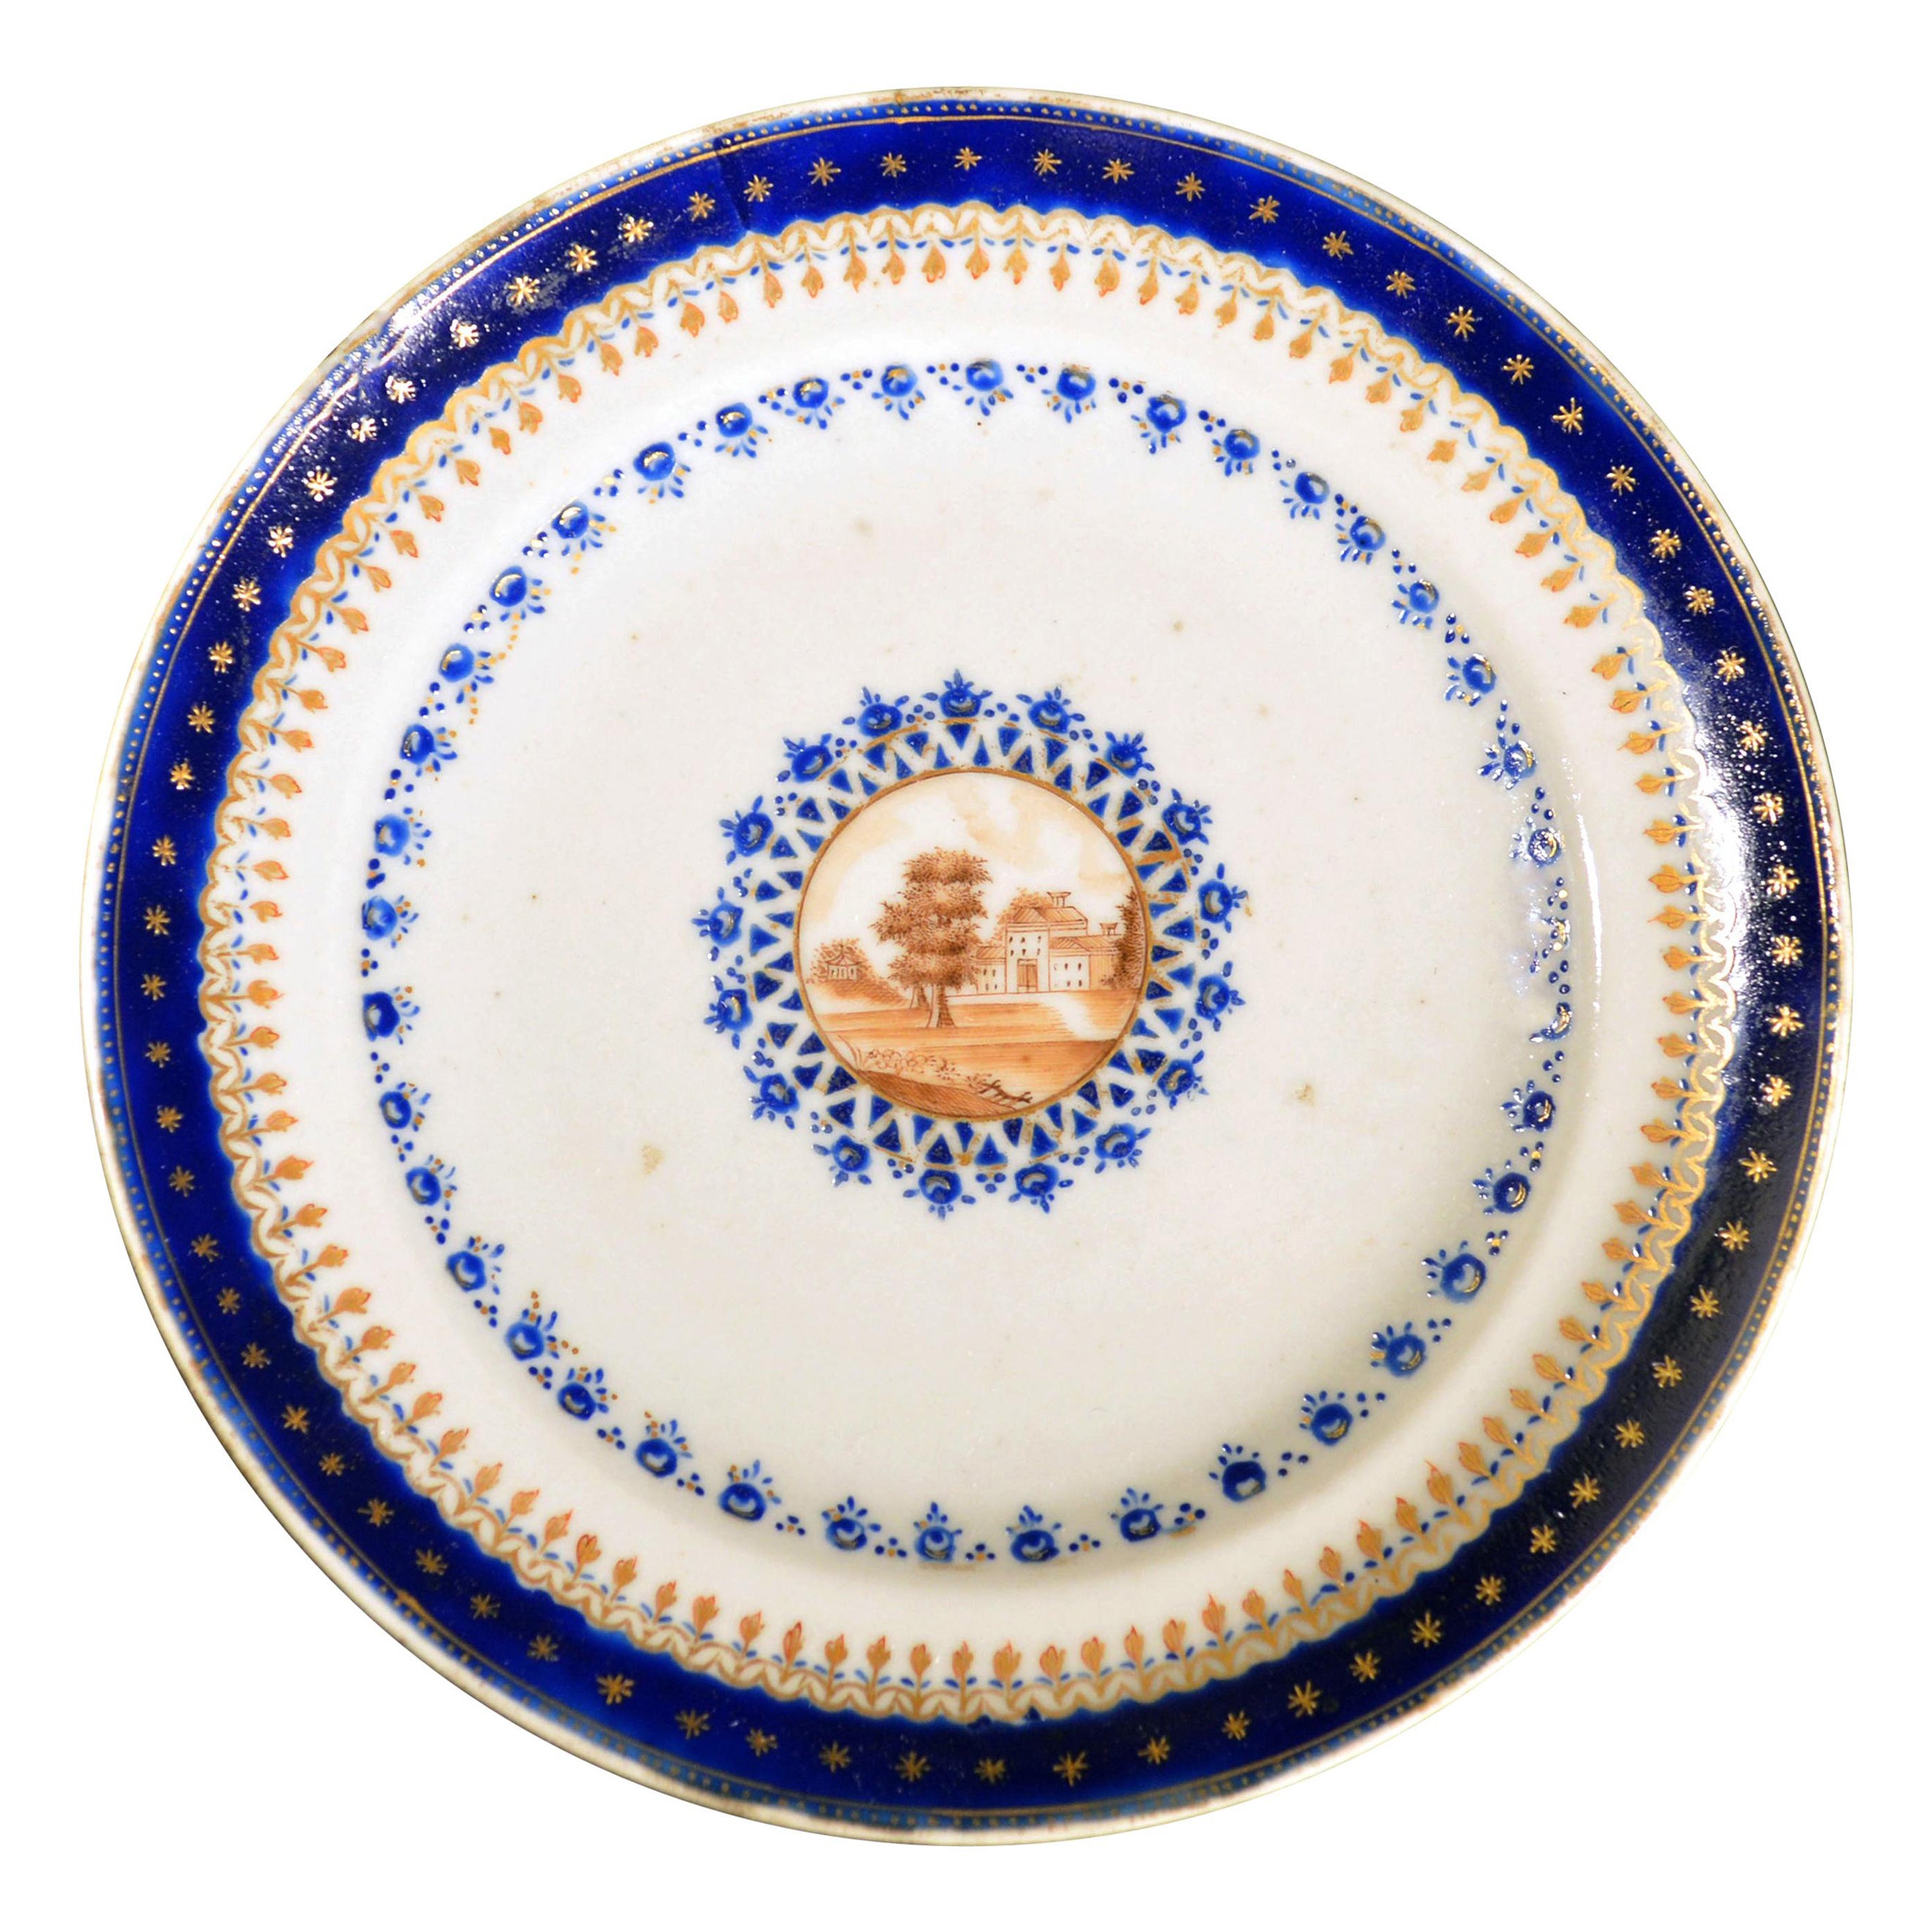 Chinese Export Porcelain Blue Enamel Plate Made for the American Market